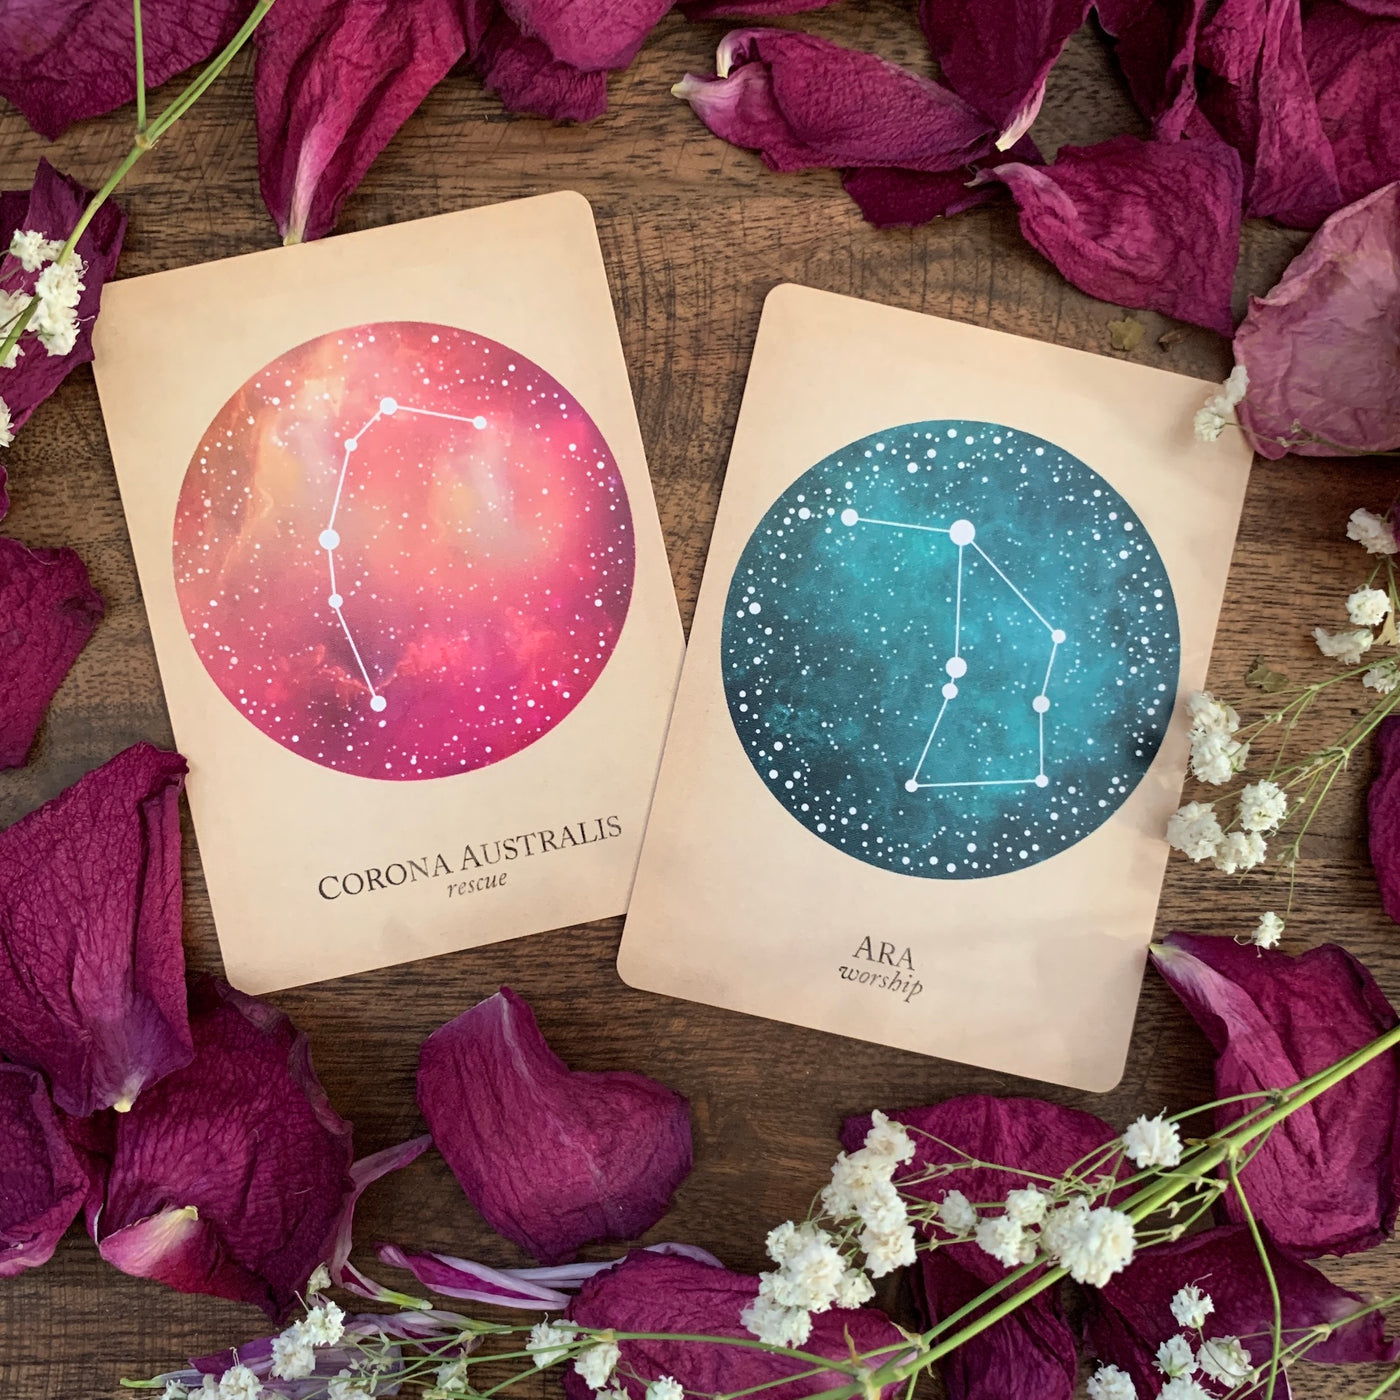 Corona Australis and Ara cards from The Compendium of Constellations: keyword edition 